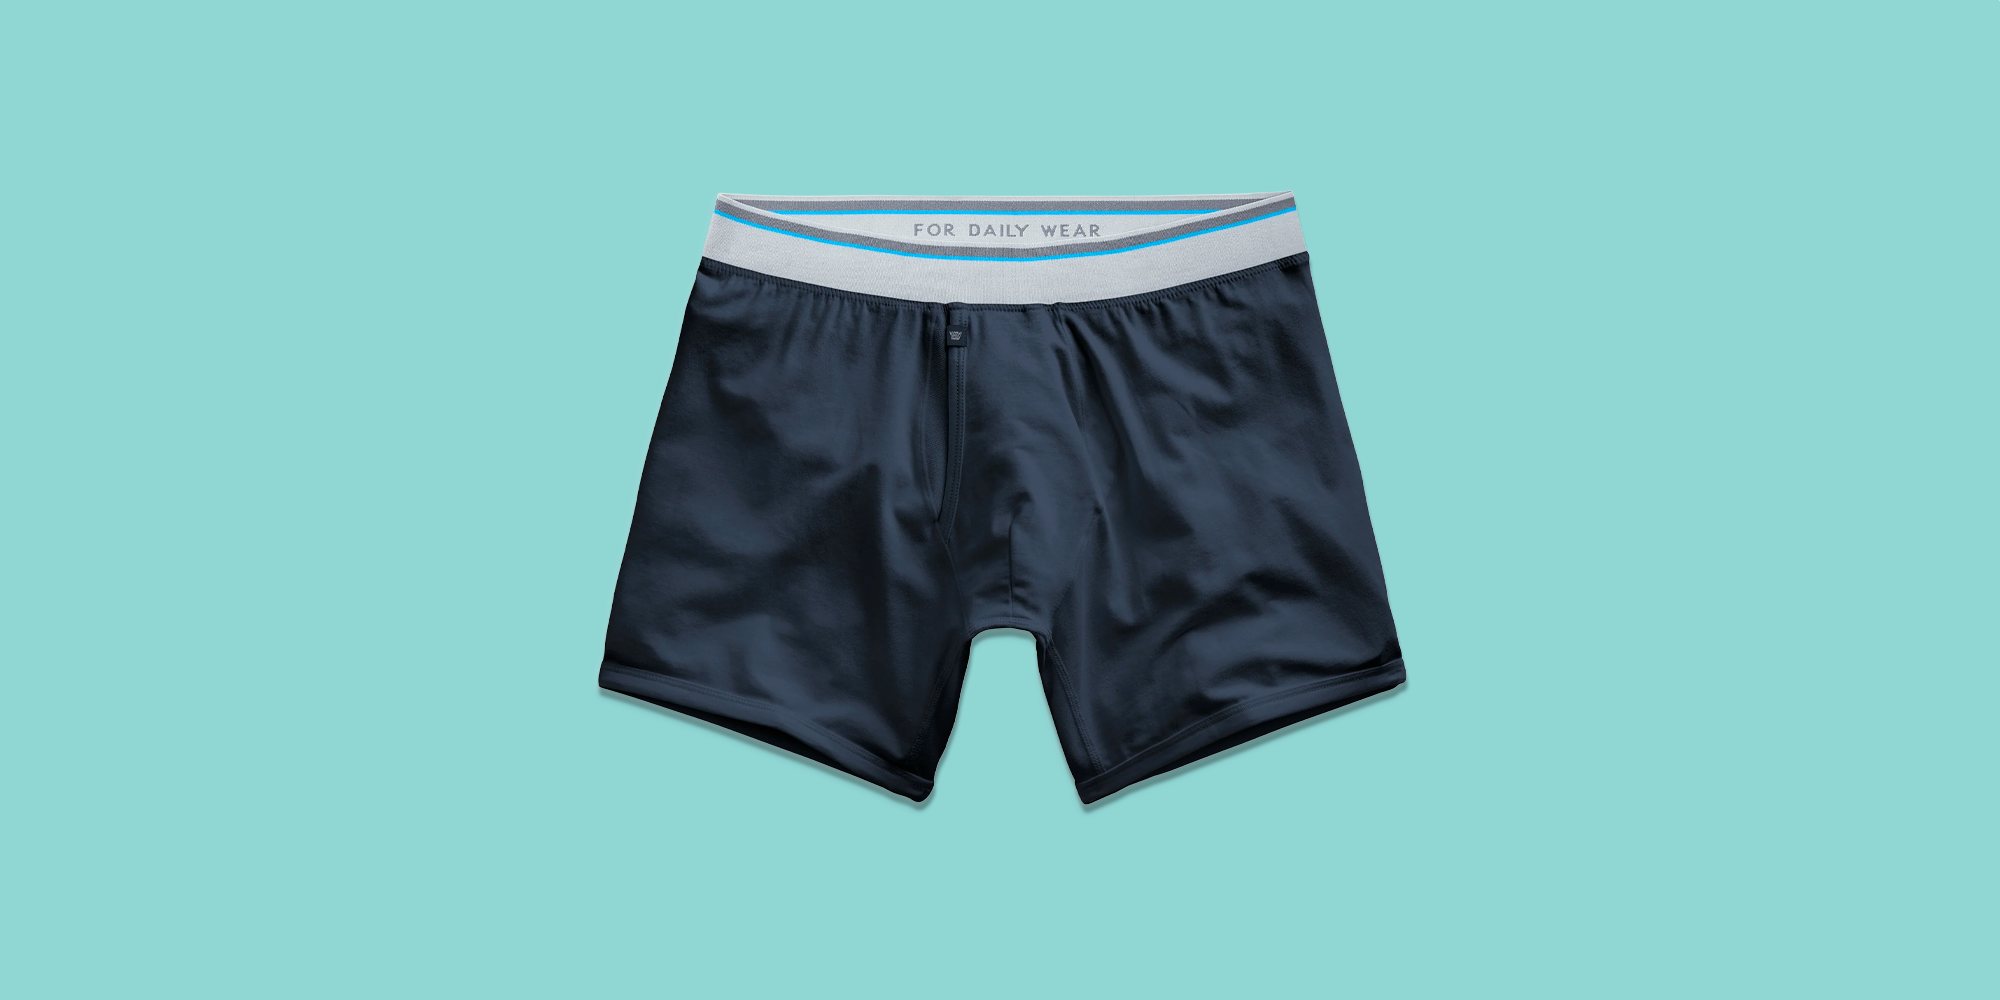 ZEO-LINE Mesh Absorbent Sanitary Shorts, Clothing, ONLINE SHOP